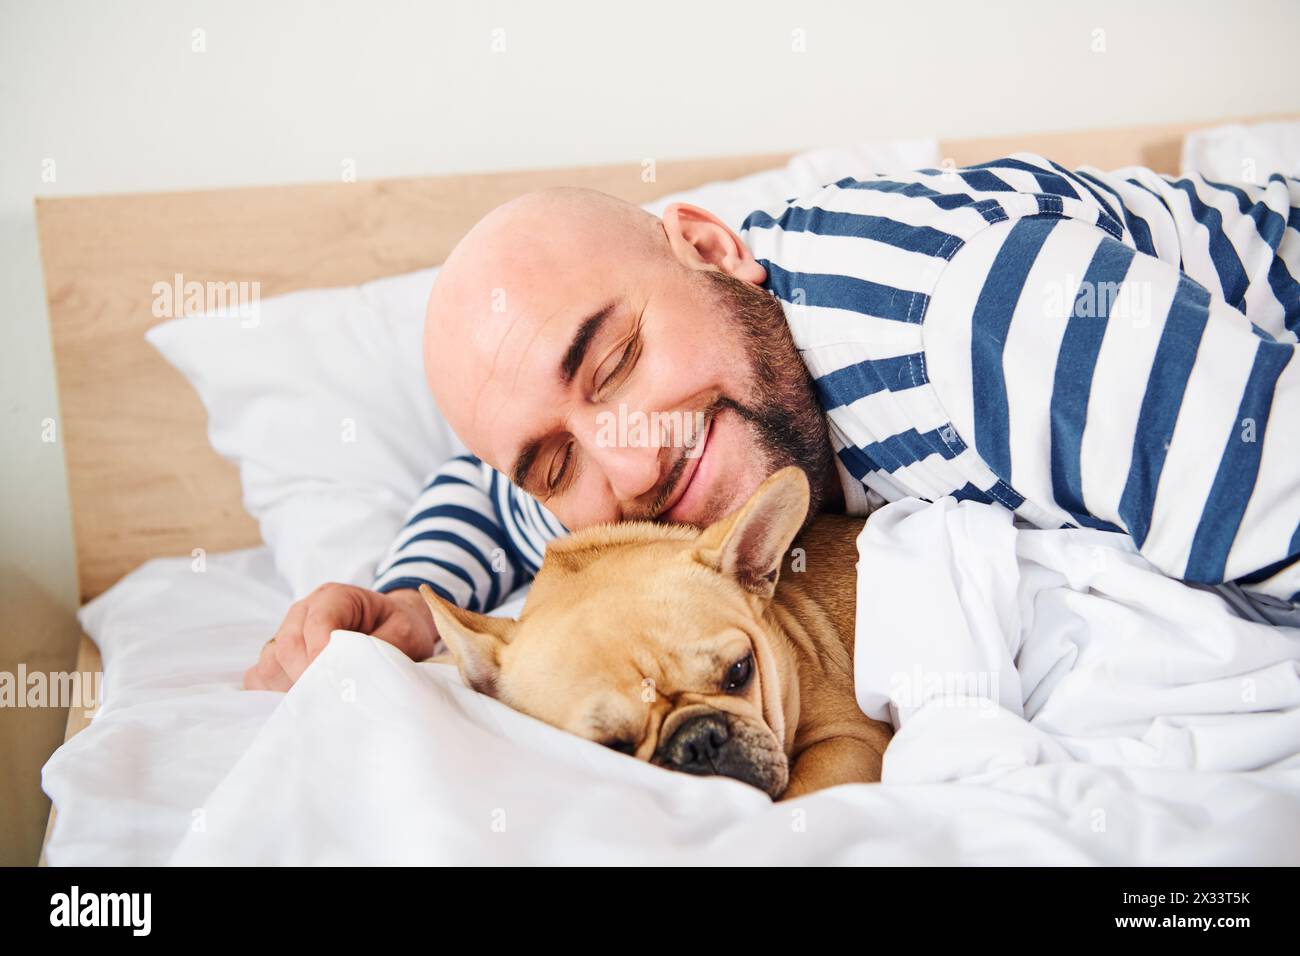 A man and his dog peacefully lie in bed together. Stock Photo